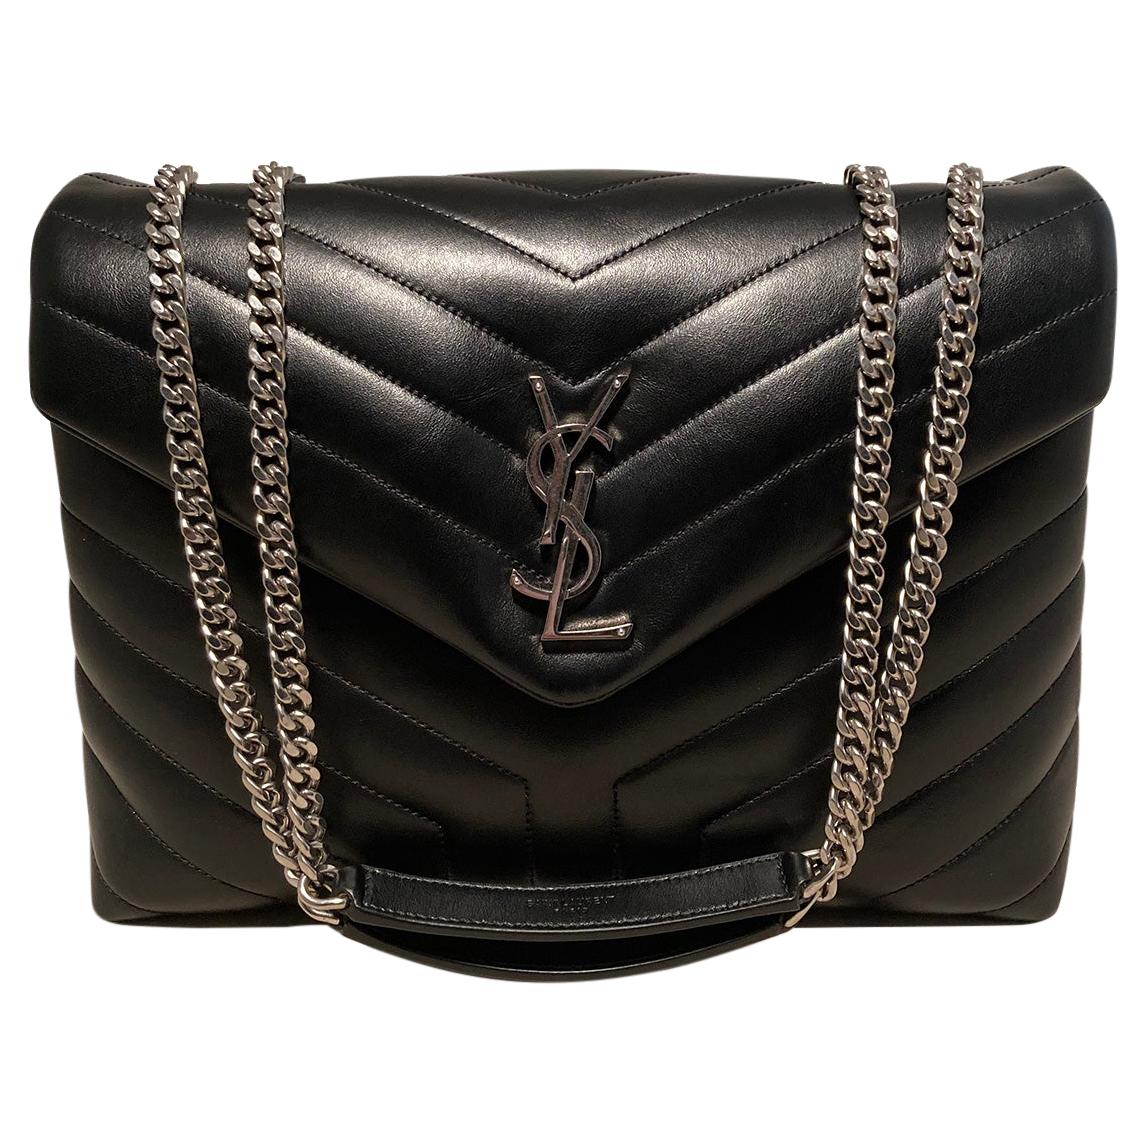 Details 61+ ysl bags on sale - in.cdgdbentre